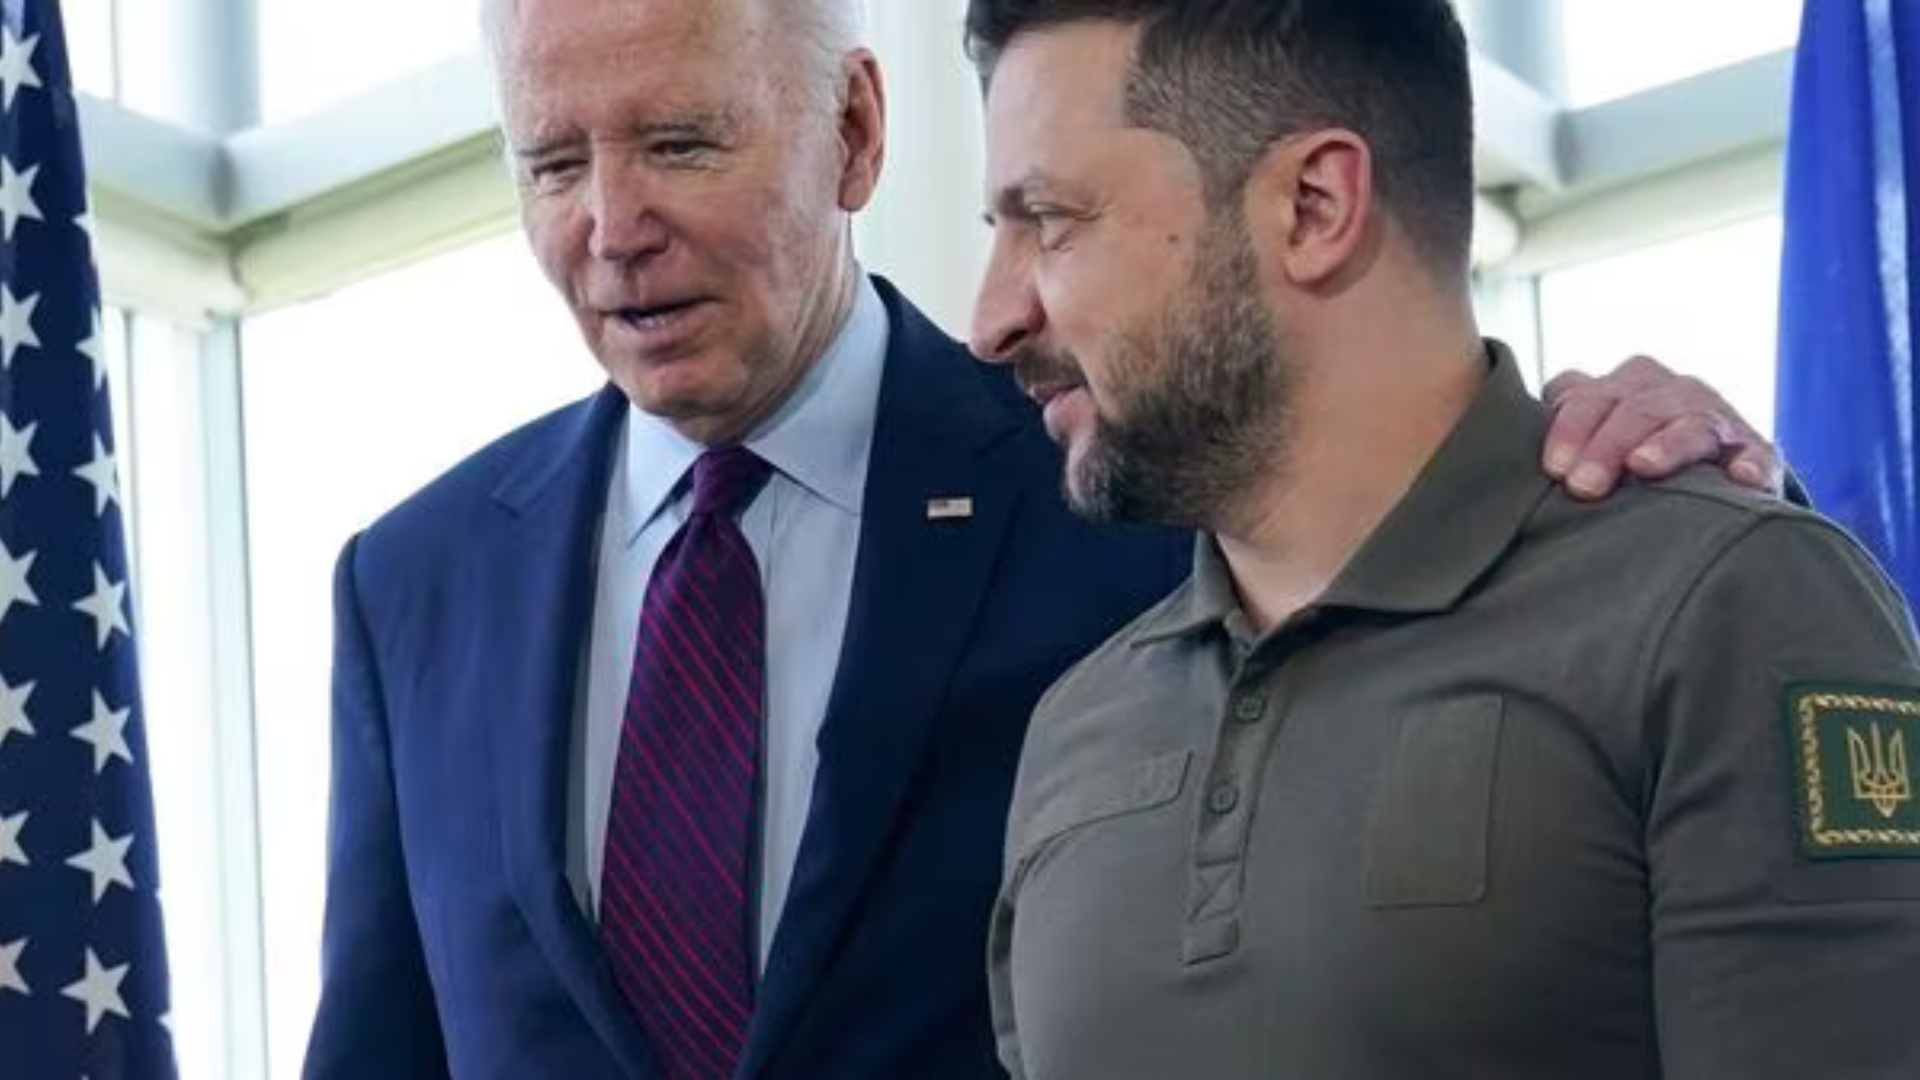 Biden Apologizes to Zelenskyy for Delay in Military Aid, Announces $225M Aid